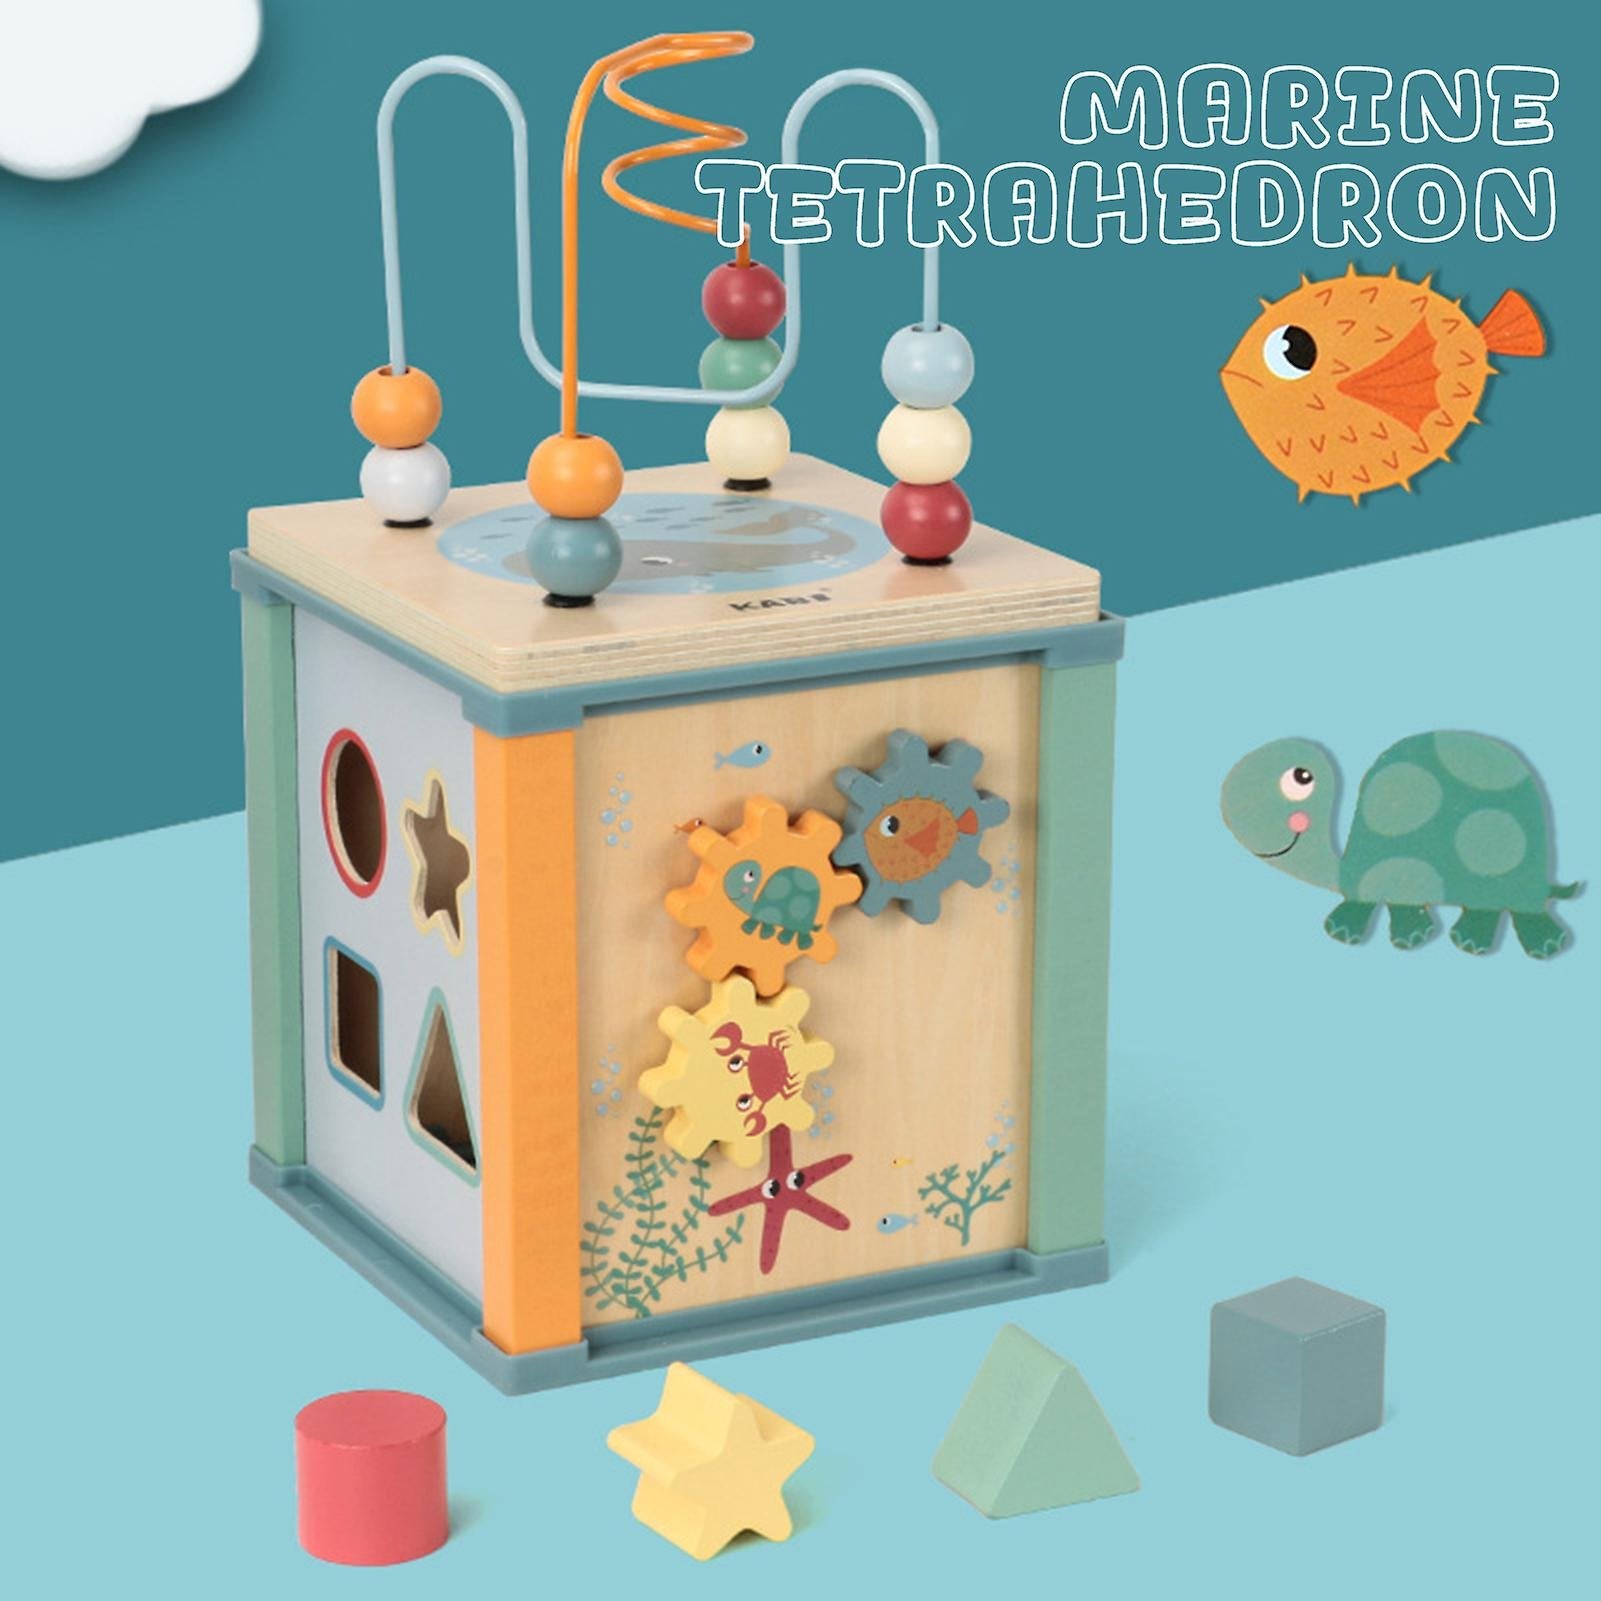 Multifunctional Wooden Activity Cube